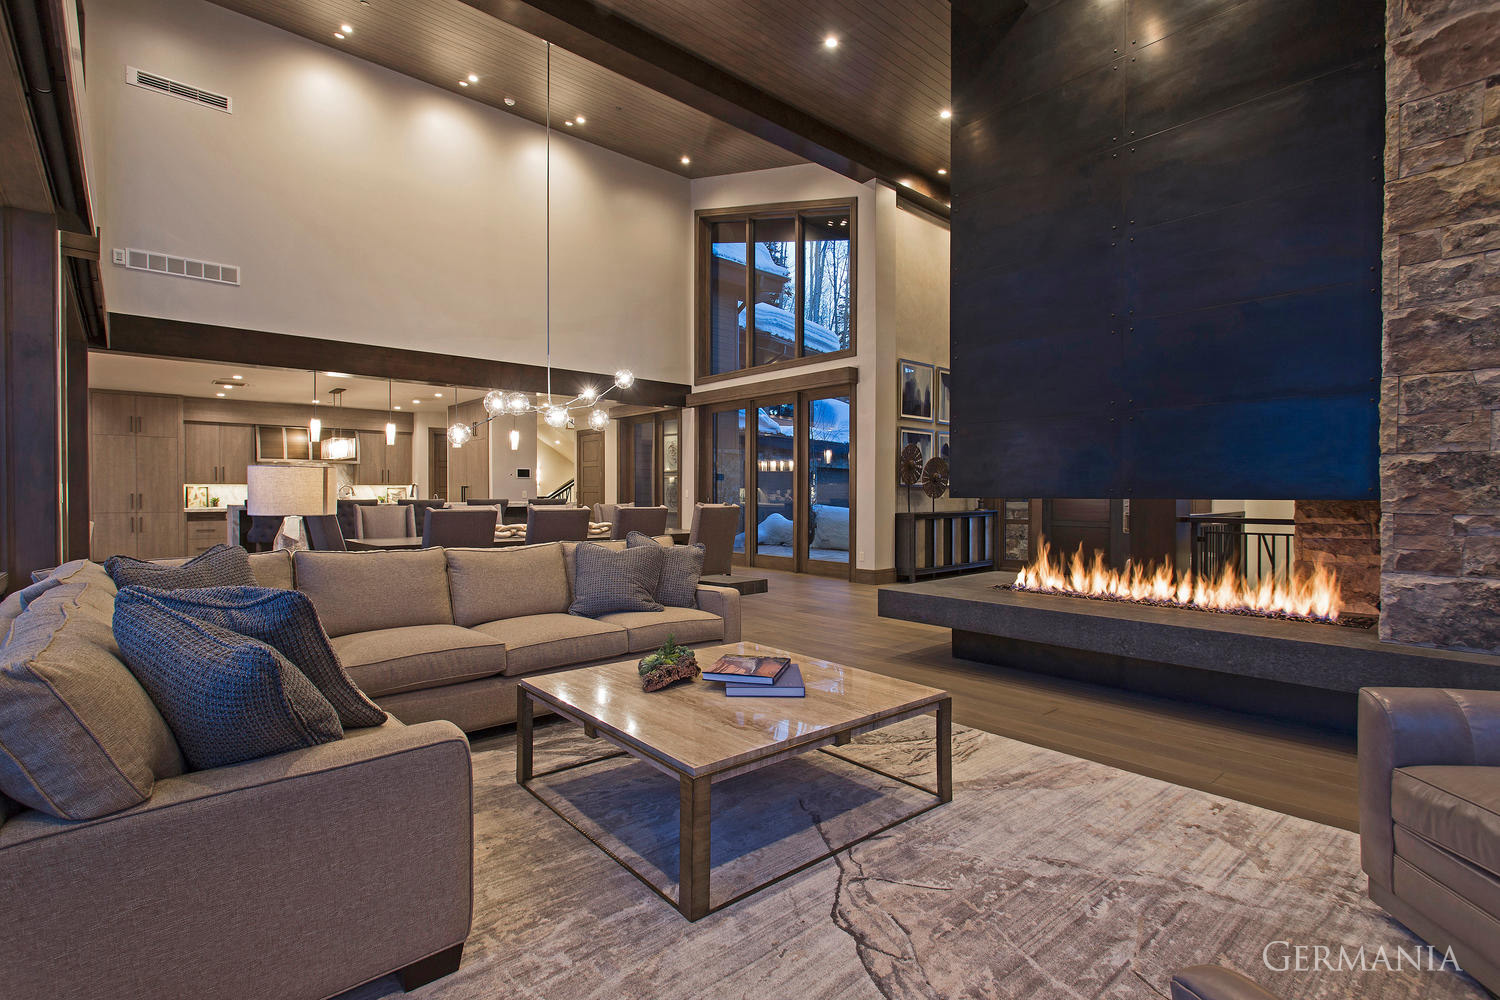 At Germania Construction, we will build your own mansion living room. From the fireplace to the tongue and groove ceilings, we're masters at building every critical component for your luxury home.